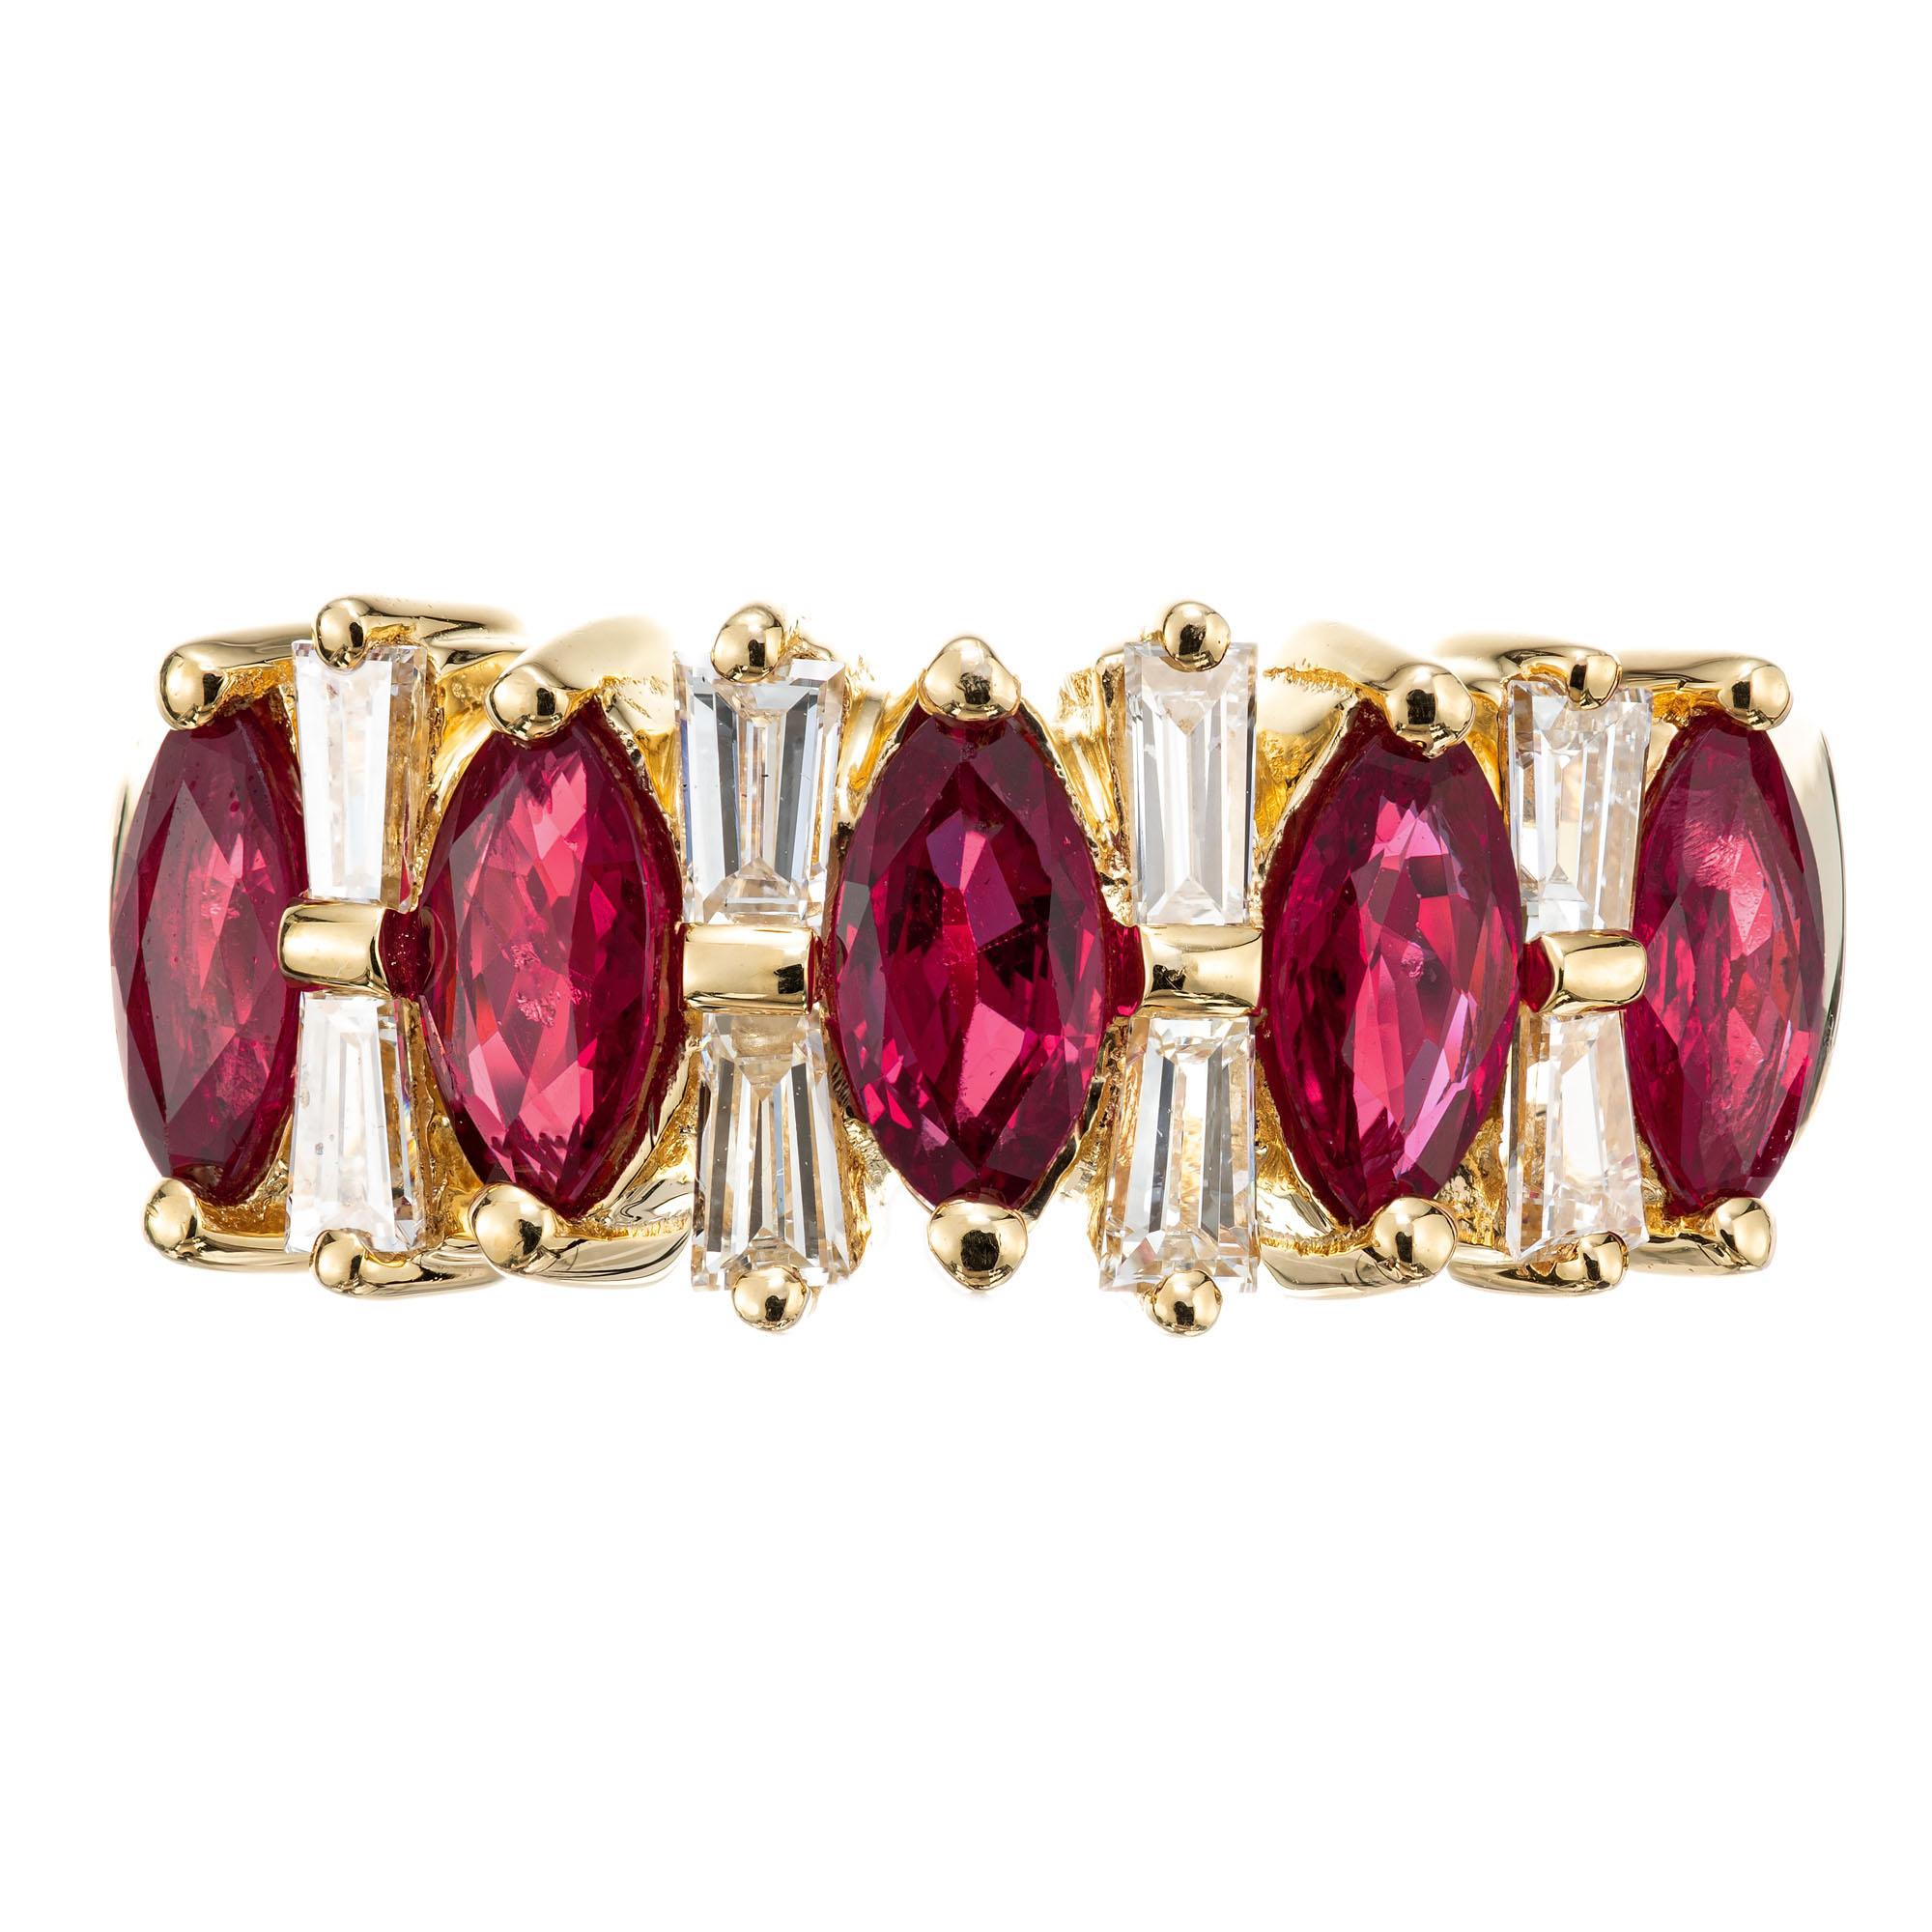 Ruby and diamond band ring. 5 marquise cut diamonds with 8 tapered baguette diamonds, set in an 18k yellow gold band. 

5 marquise red ruby, VS approx. 1.25cts
8 tapered baguette diamonds, H-I VS approx. .50cts
Size 6 and sizable 
18k yellow gold